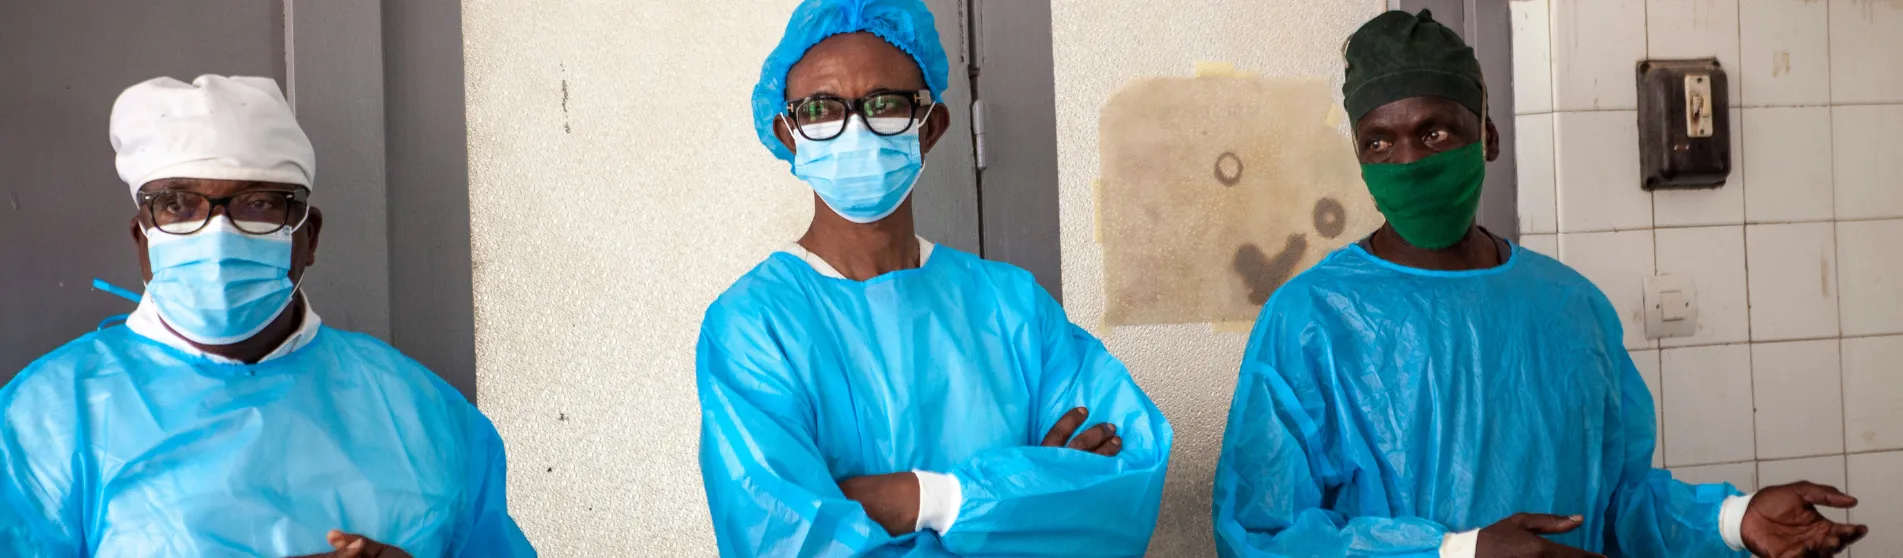 Surgeons with masks DRC_banner